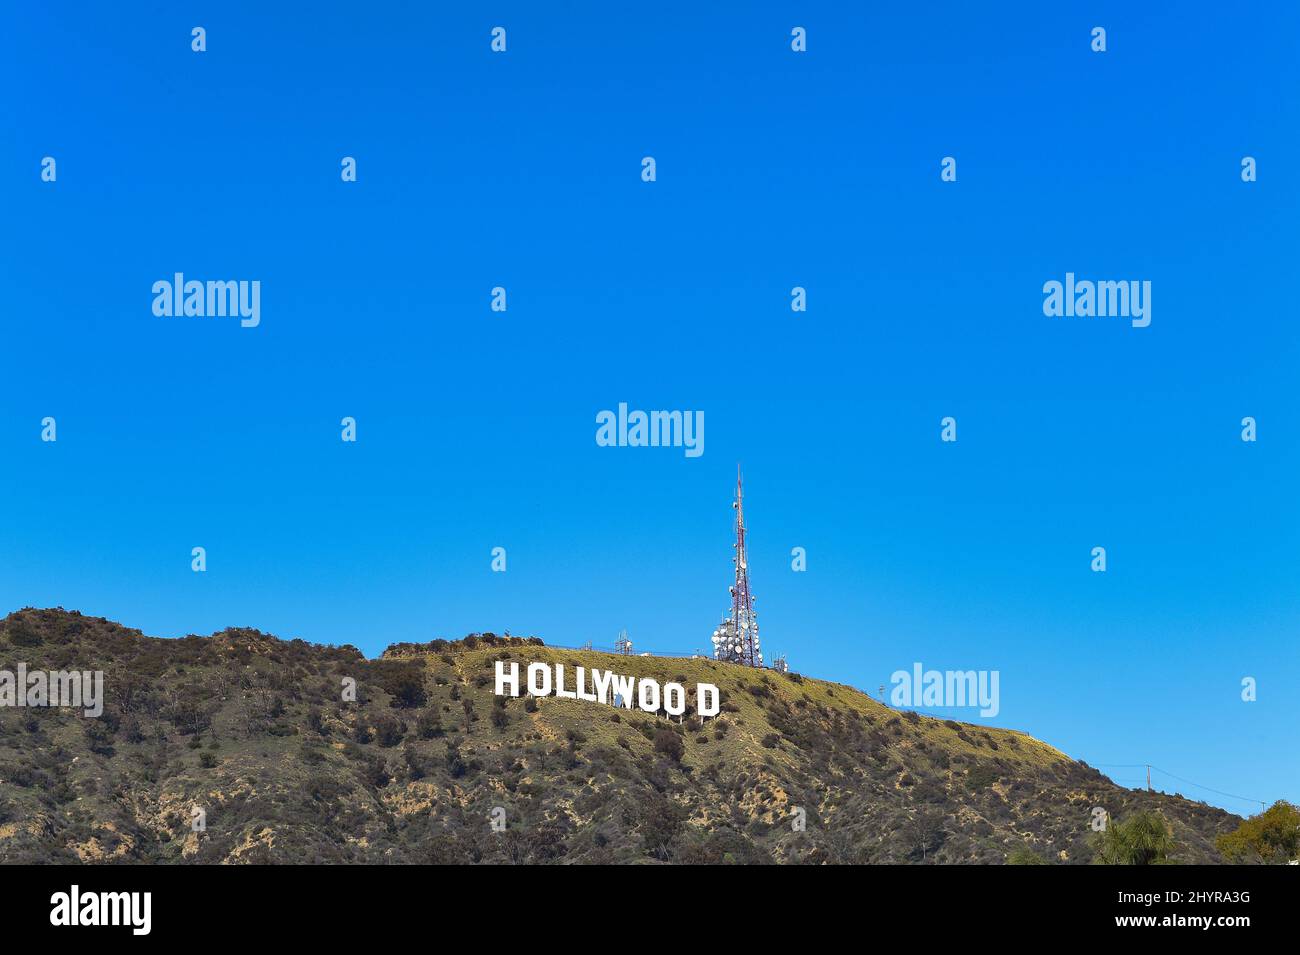 Hollywood Sign during the Hollywood Covid 19 lockdown on April 11, 2020 in Hollywood, CA. Stock Photo